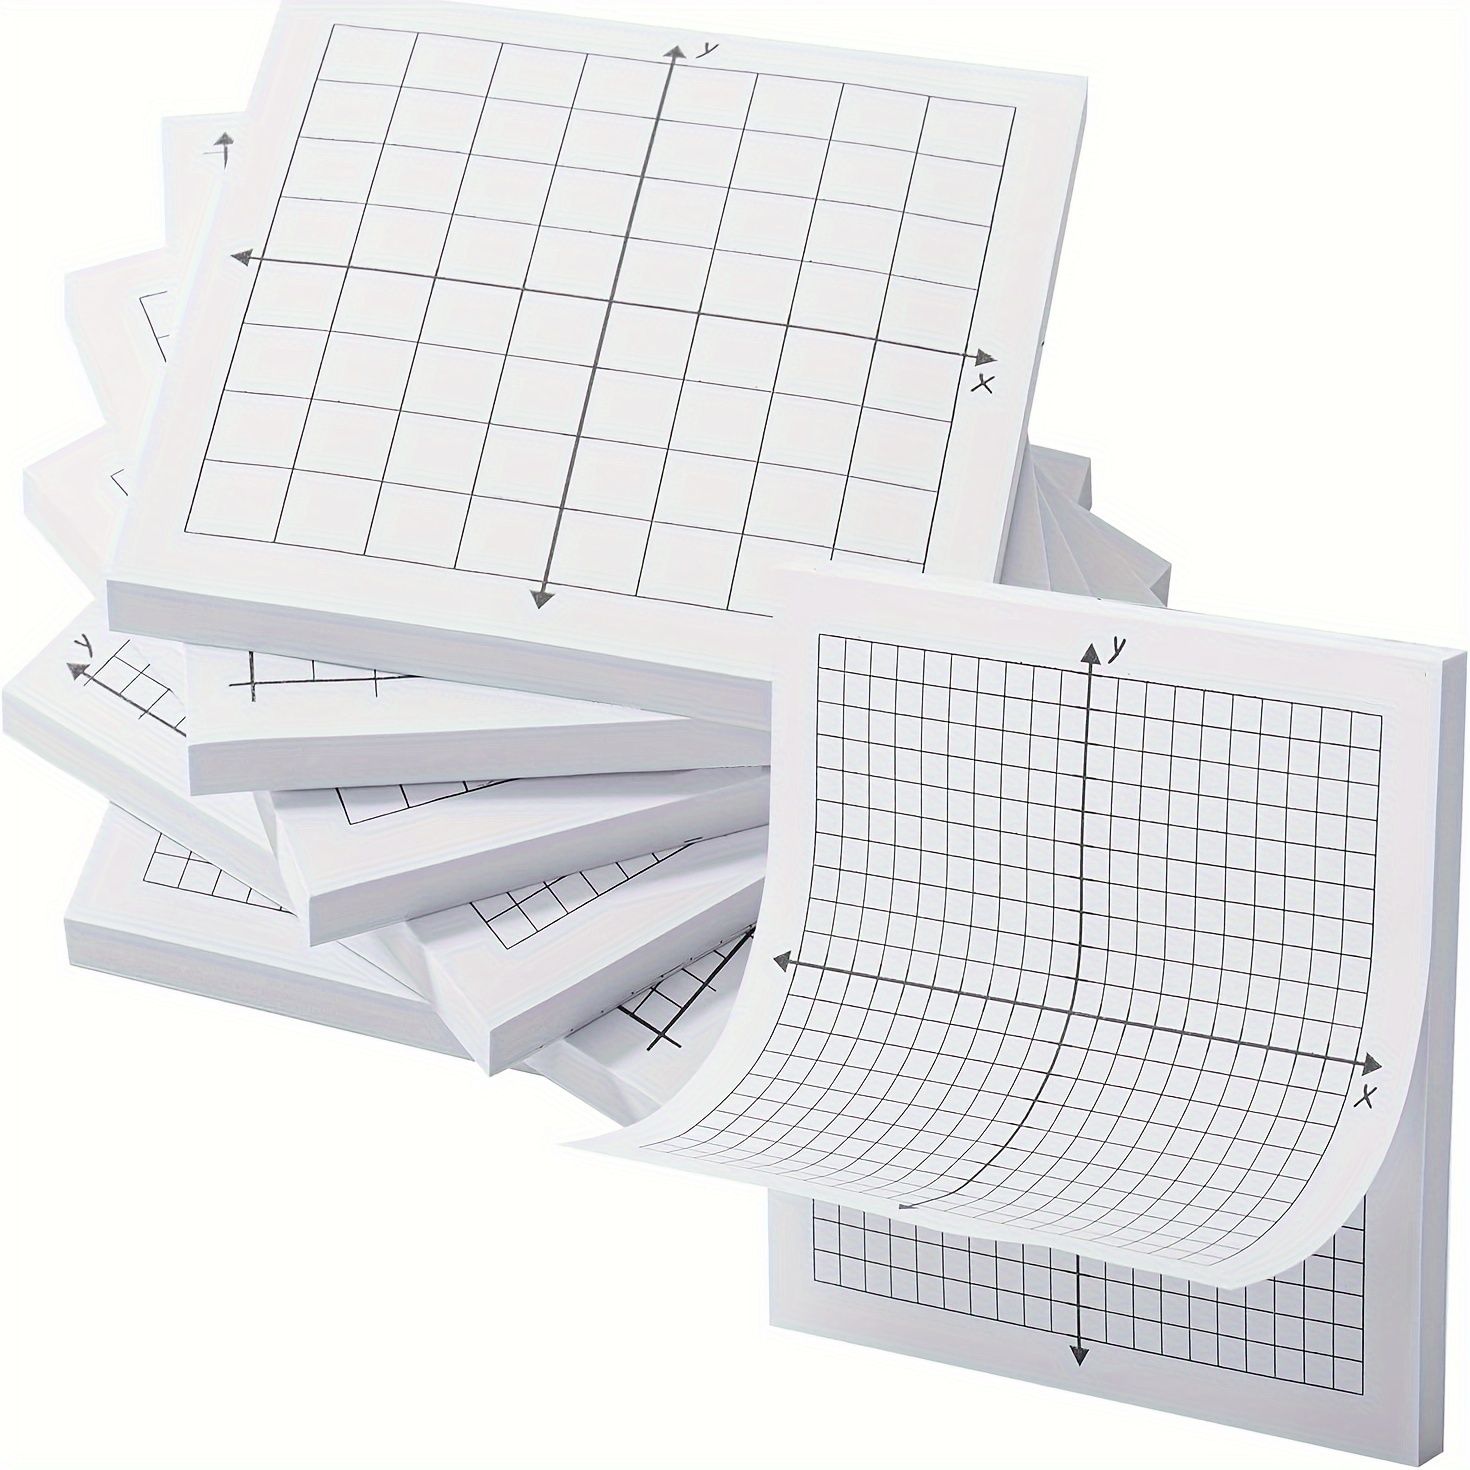 

6pcs Paper Sticky Note Pads 150 Sheets 3 X 3 Inch Mini Pads Adhesive Grid Variety Of X Y Axis Coordinate Grid Notepad For Office School Supplies, 6 Designs 25 Sheets/pad